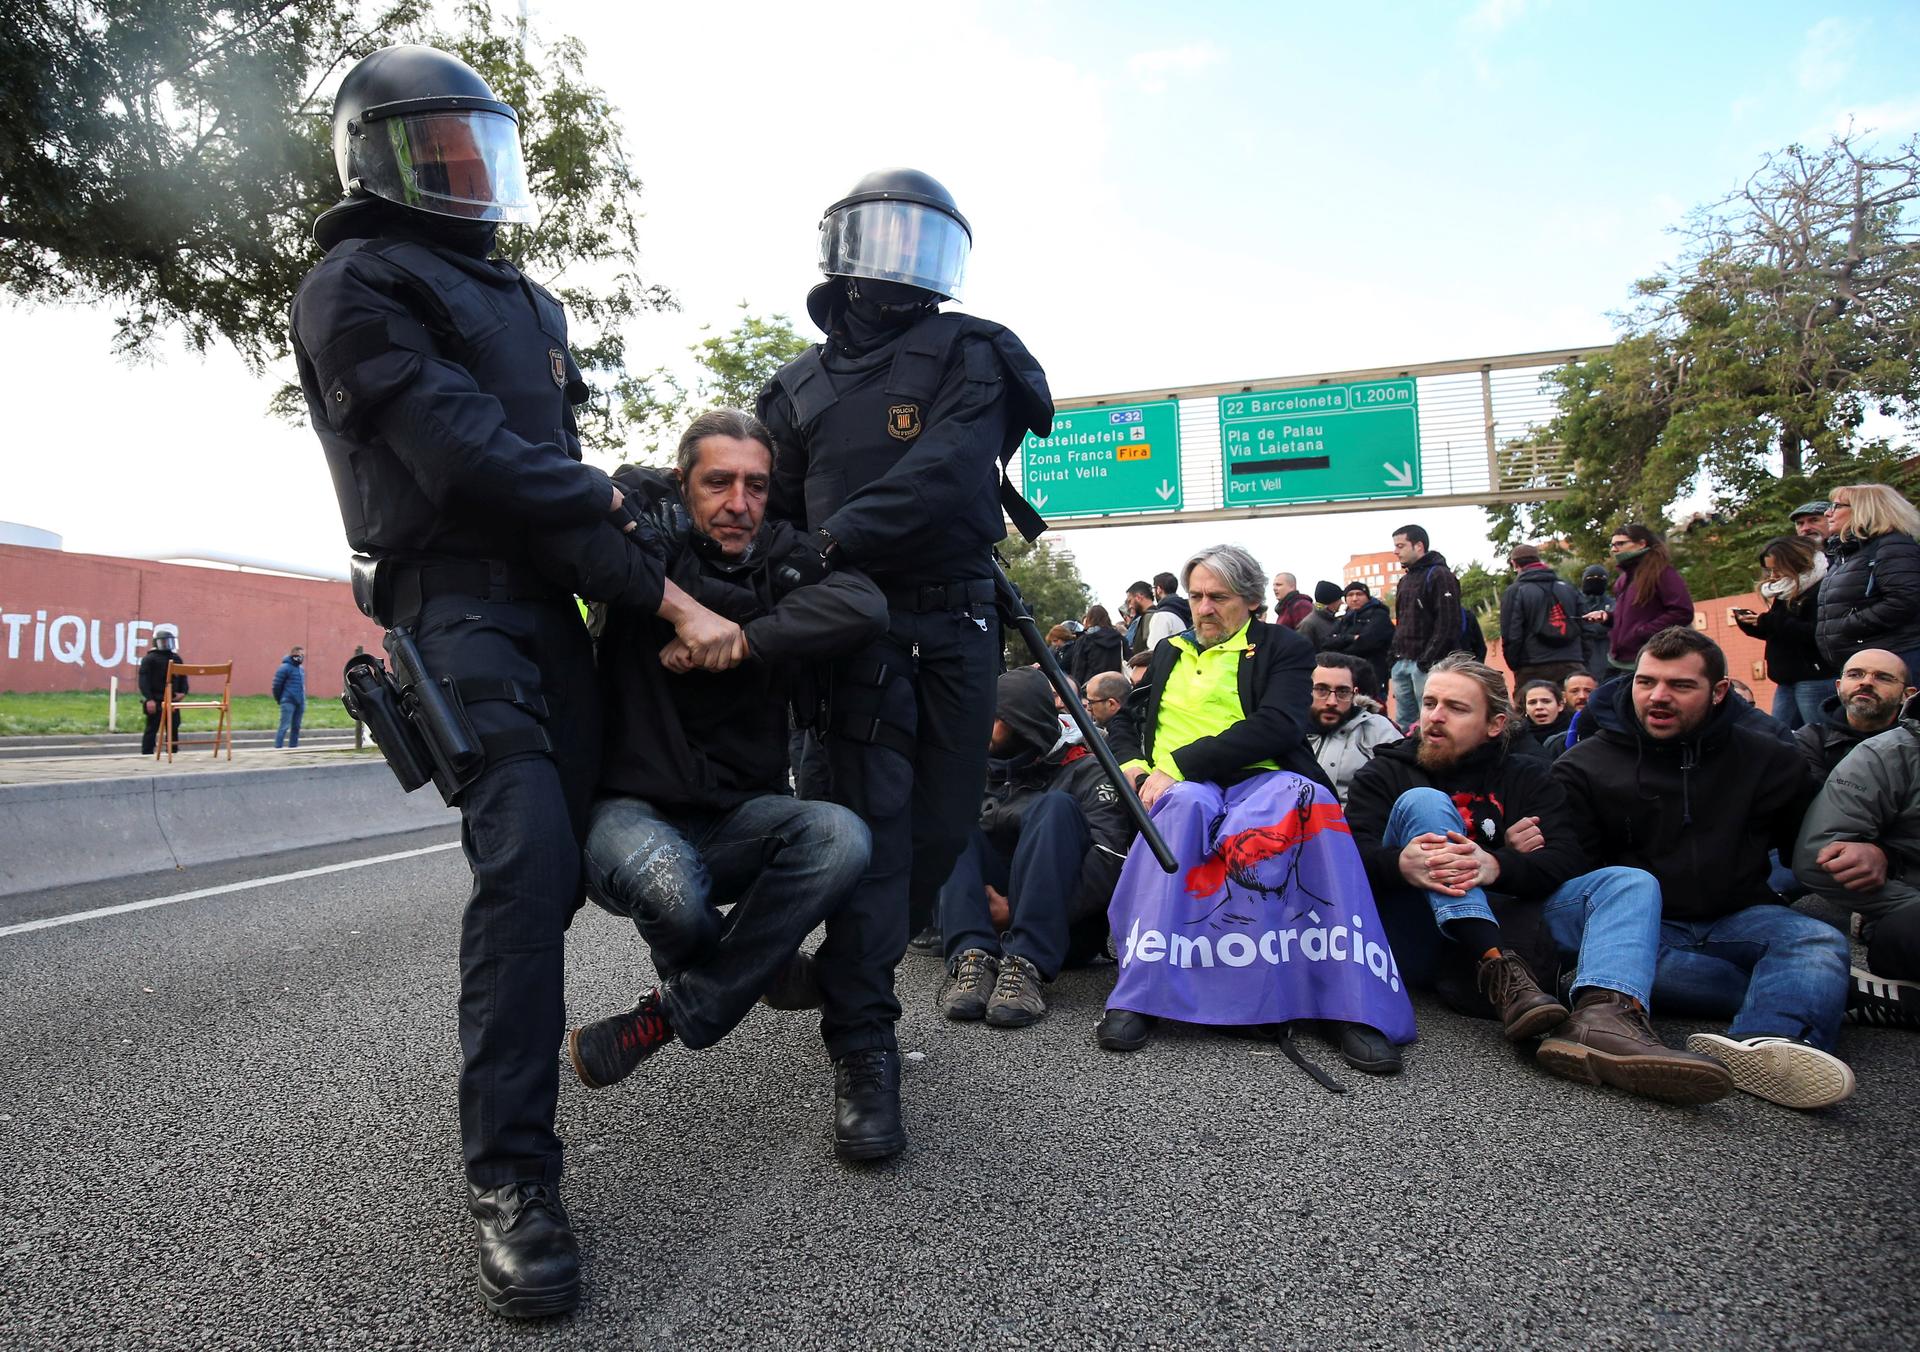 Two police officers wearing riot gear with face masks, move a man, cross-legged, from a road in Barcelona.